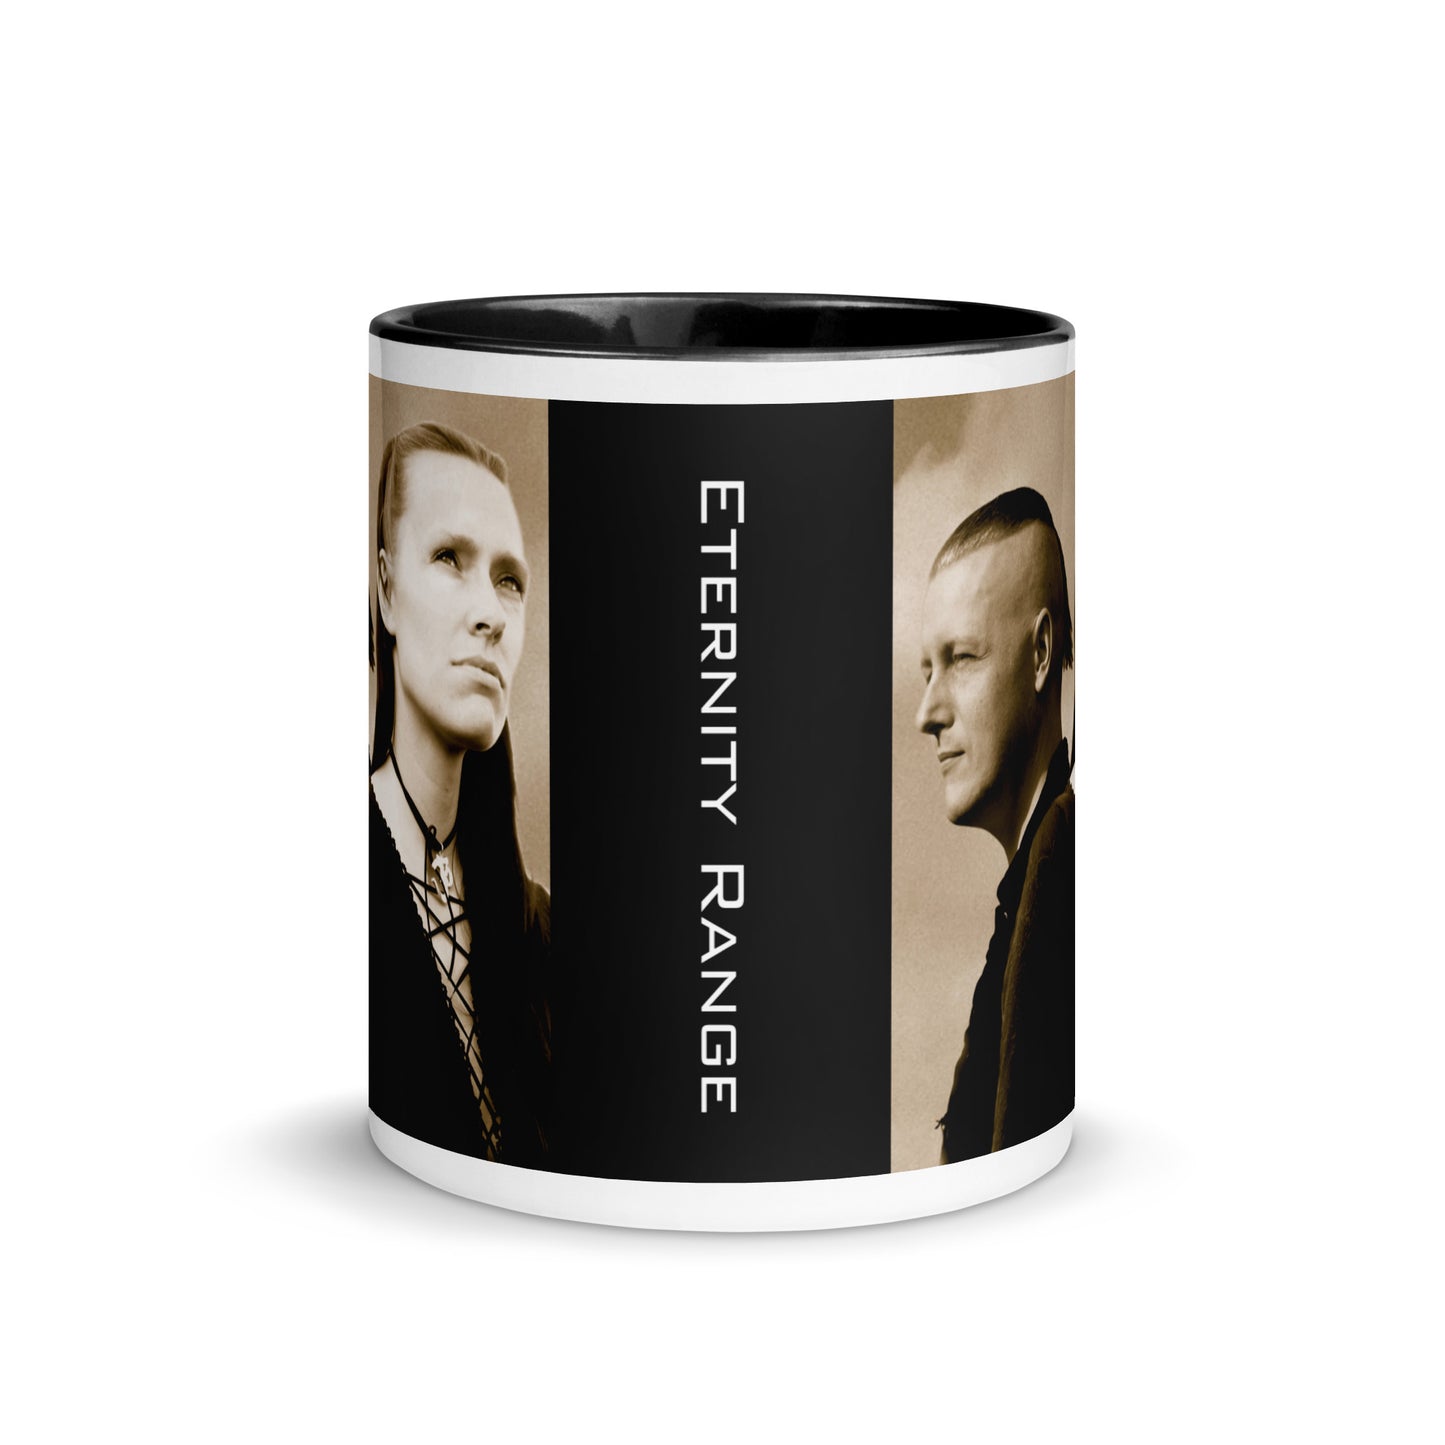 Eternity Range, official logo and photo, Mug with Color Inside